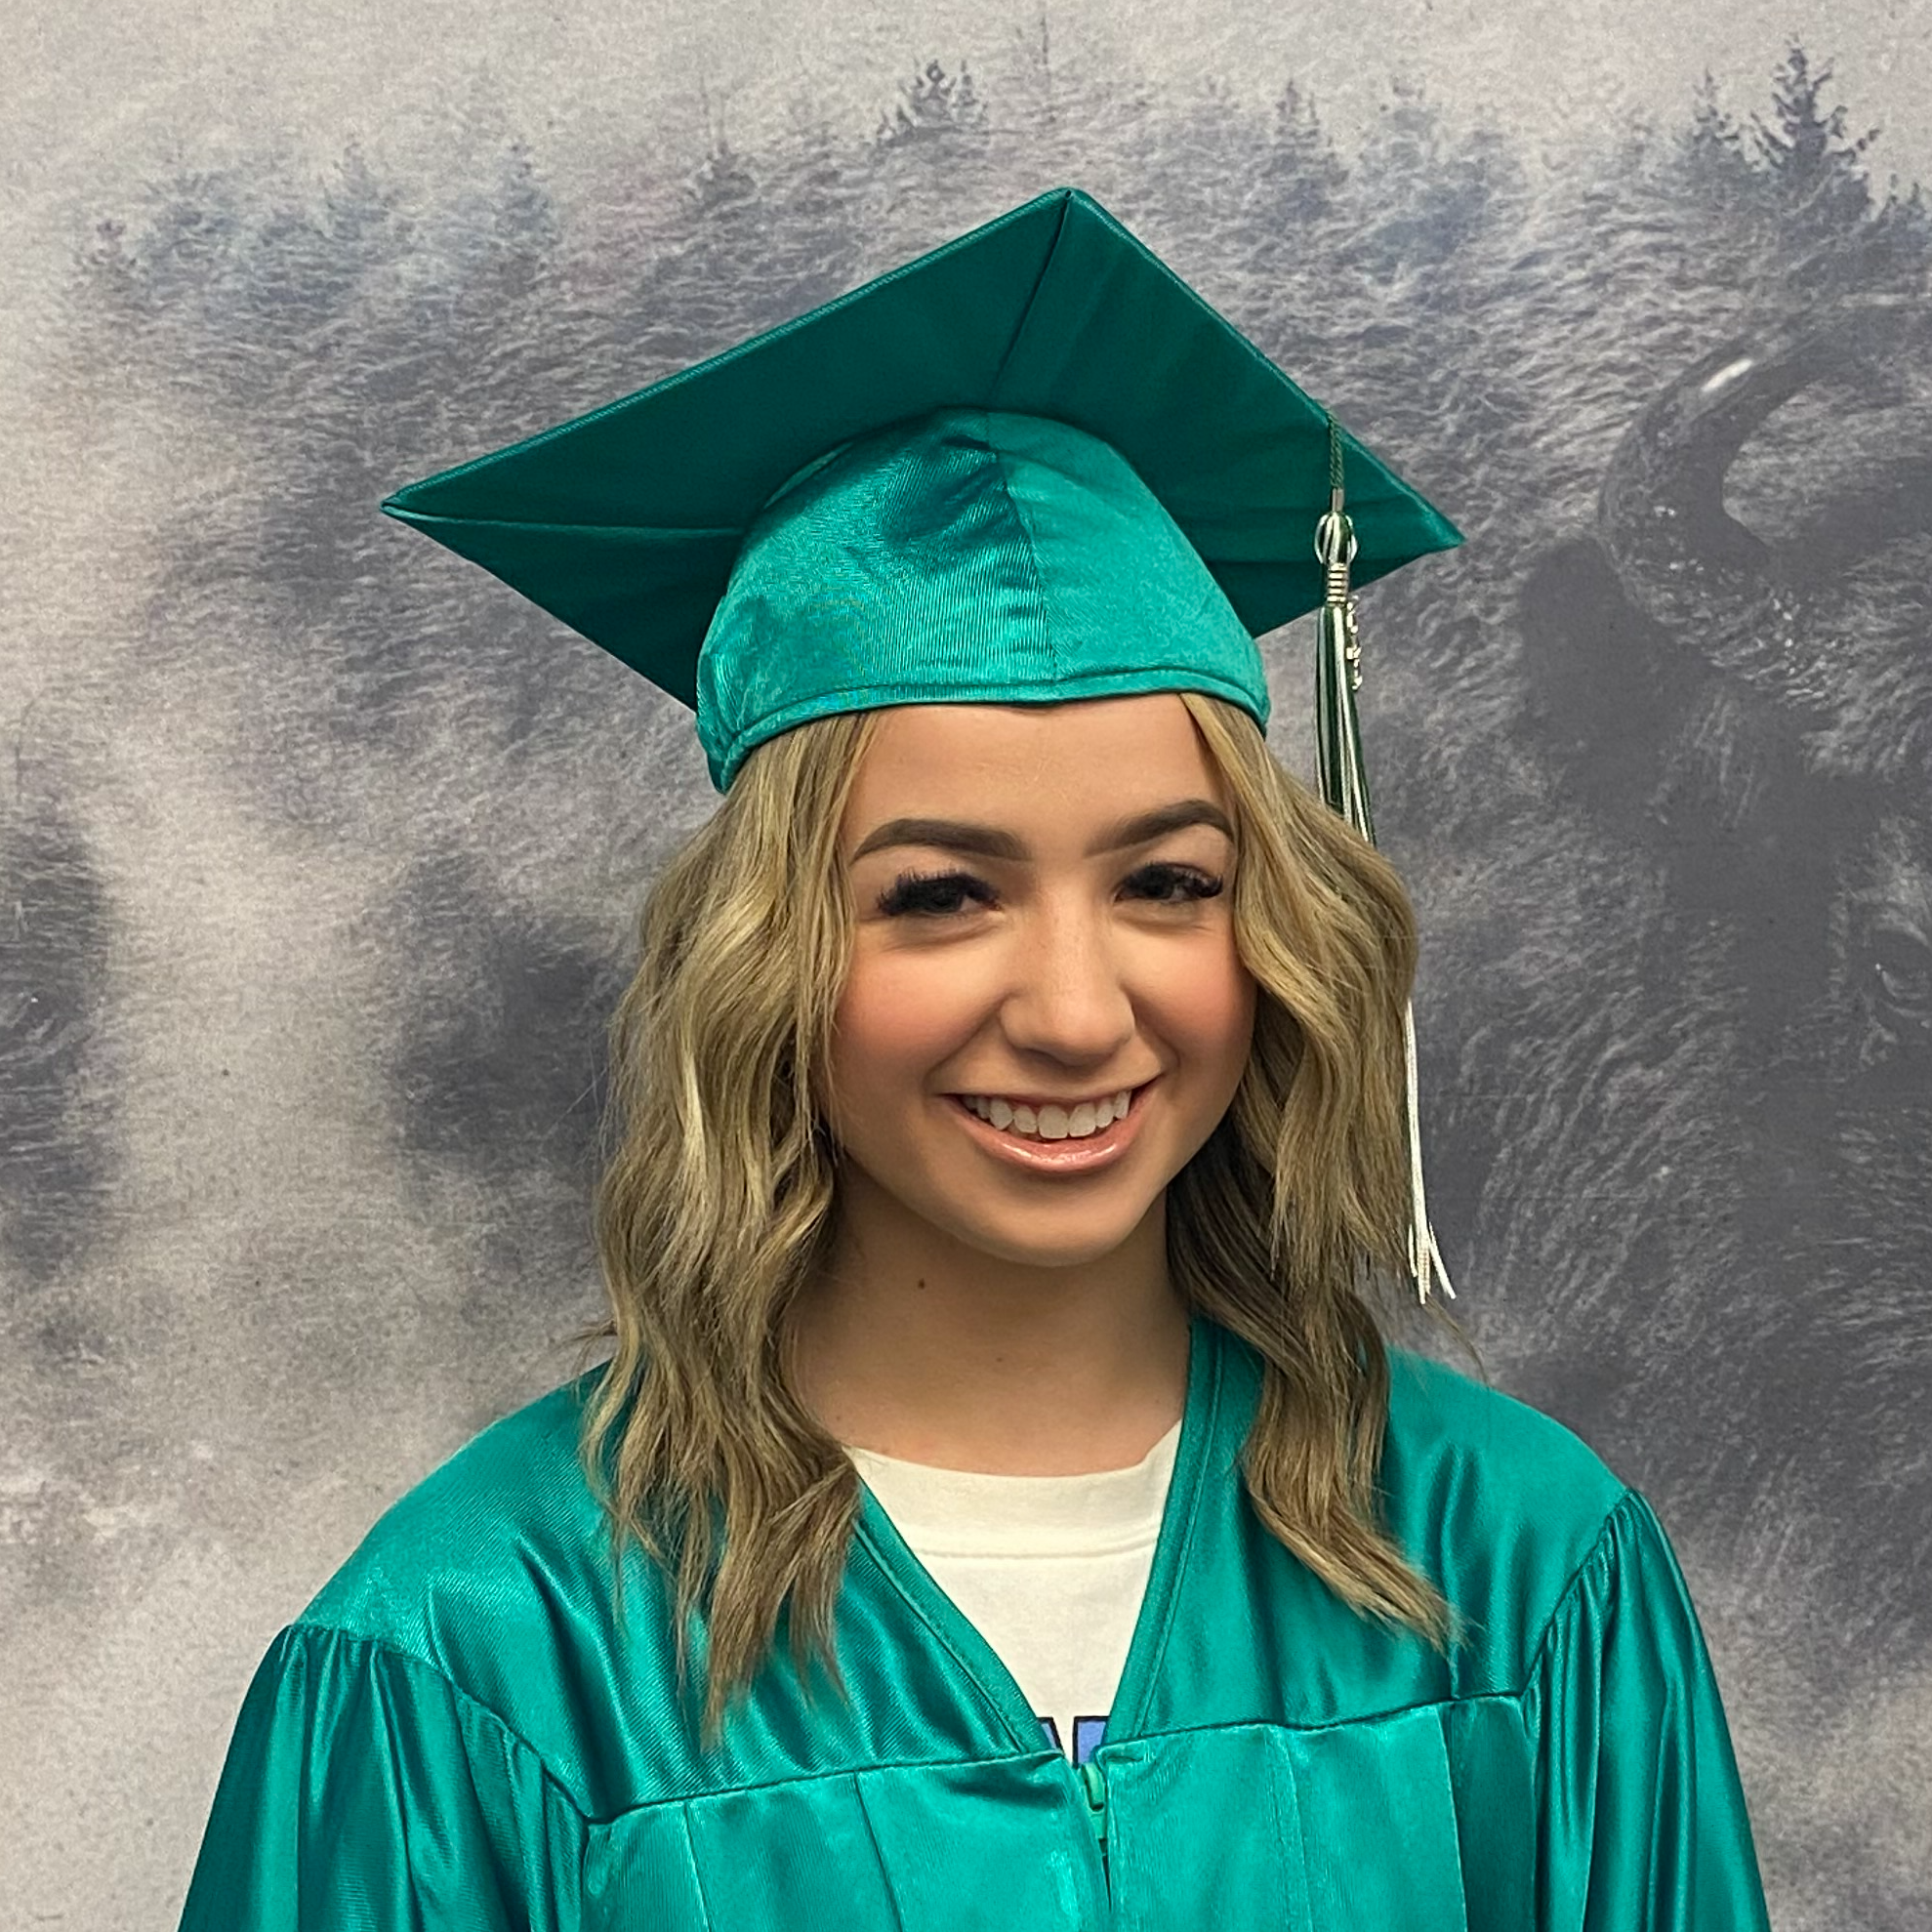 Kylee Labrum in green graduation robes and cap